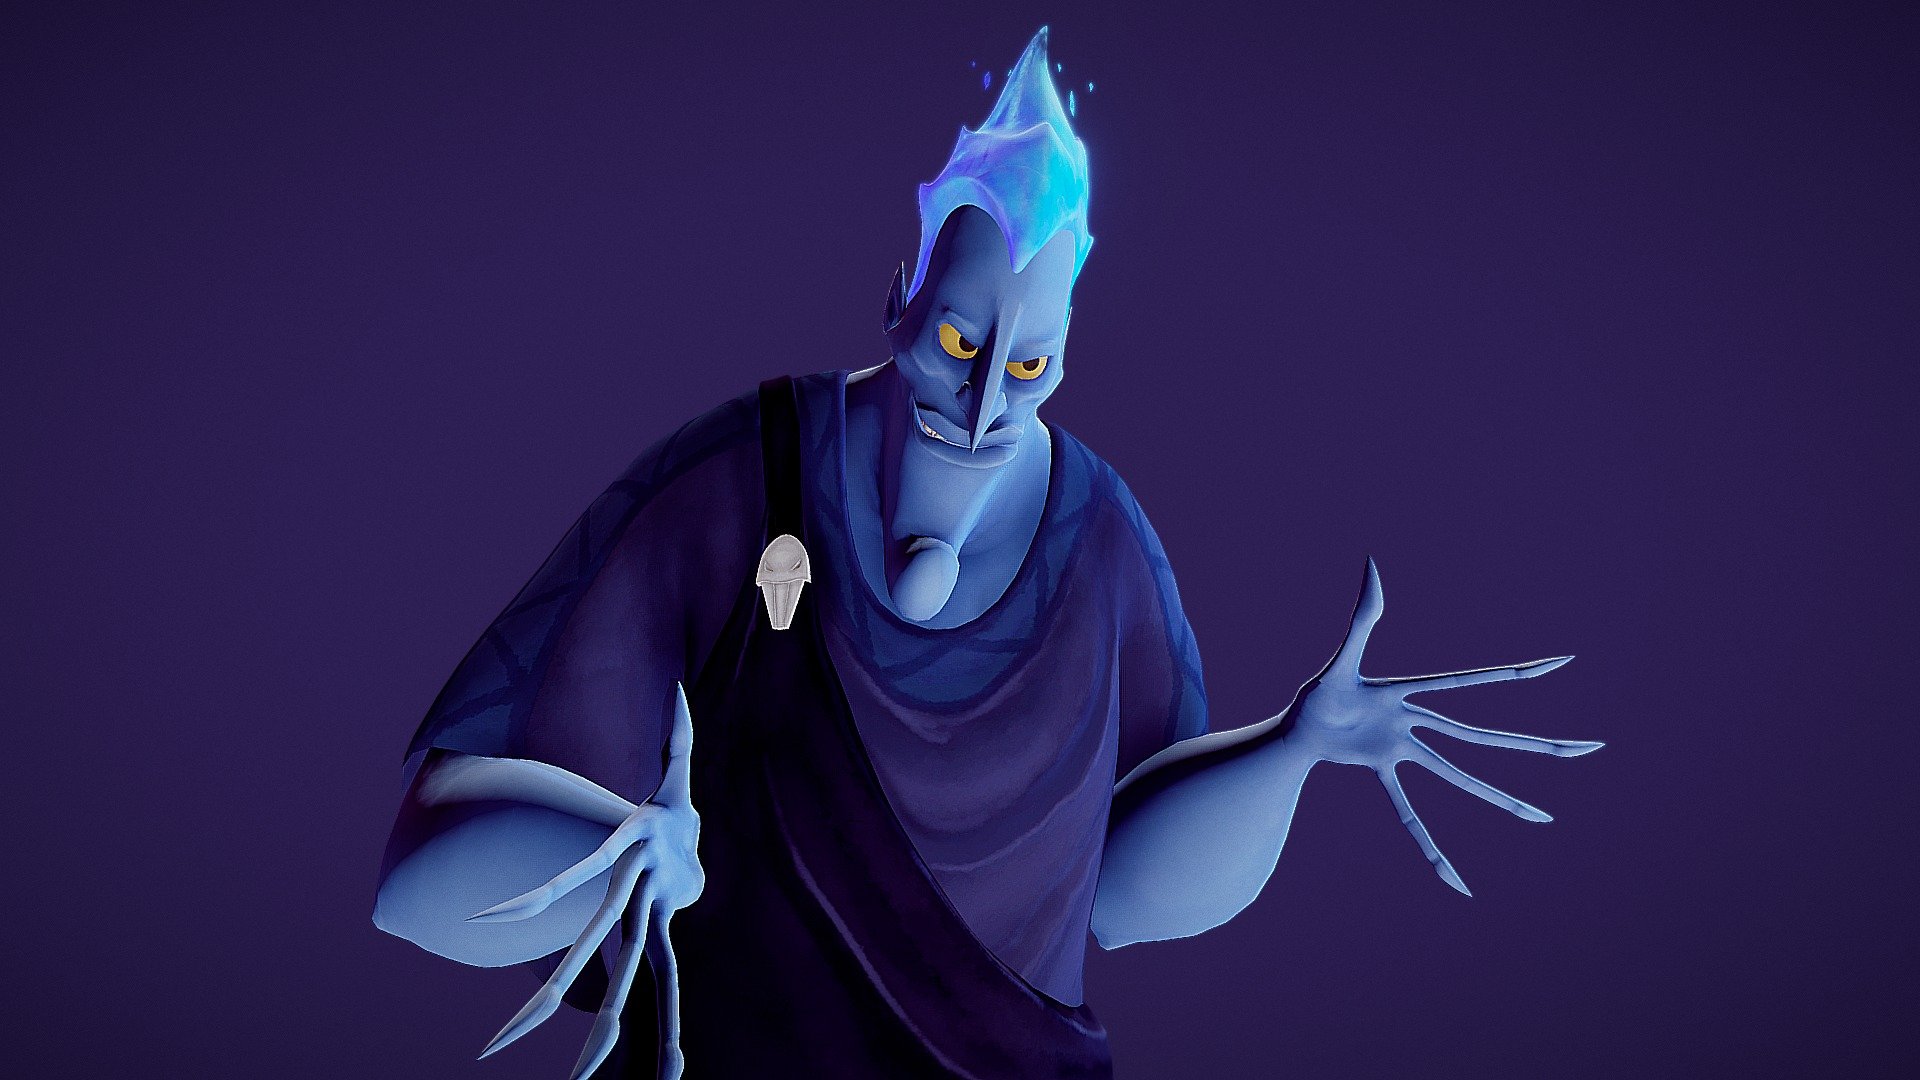 This is Hades. God of the underworld in the Greek mythology, a particular villain from the Disney movie Hercules

Programs: Maya, Zbrush and Substance Painter - Hades God of the underworld/ Dios del inframundo - 3D model by camalvez.99 3d model